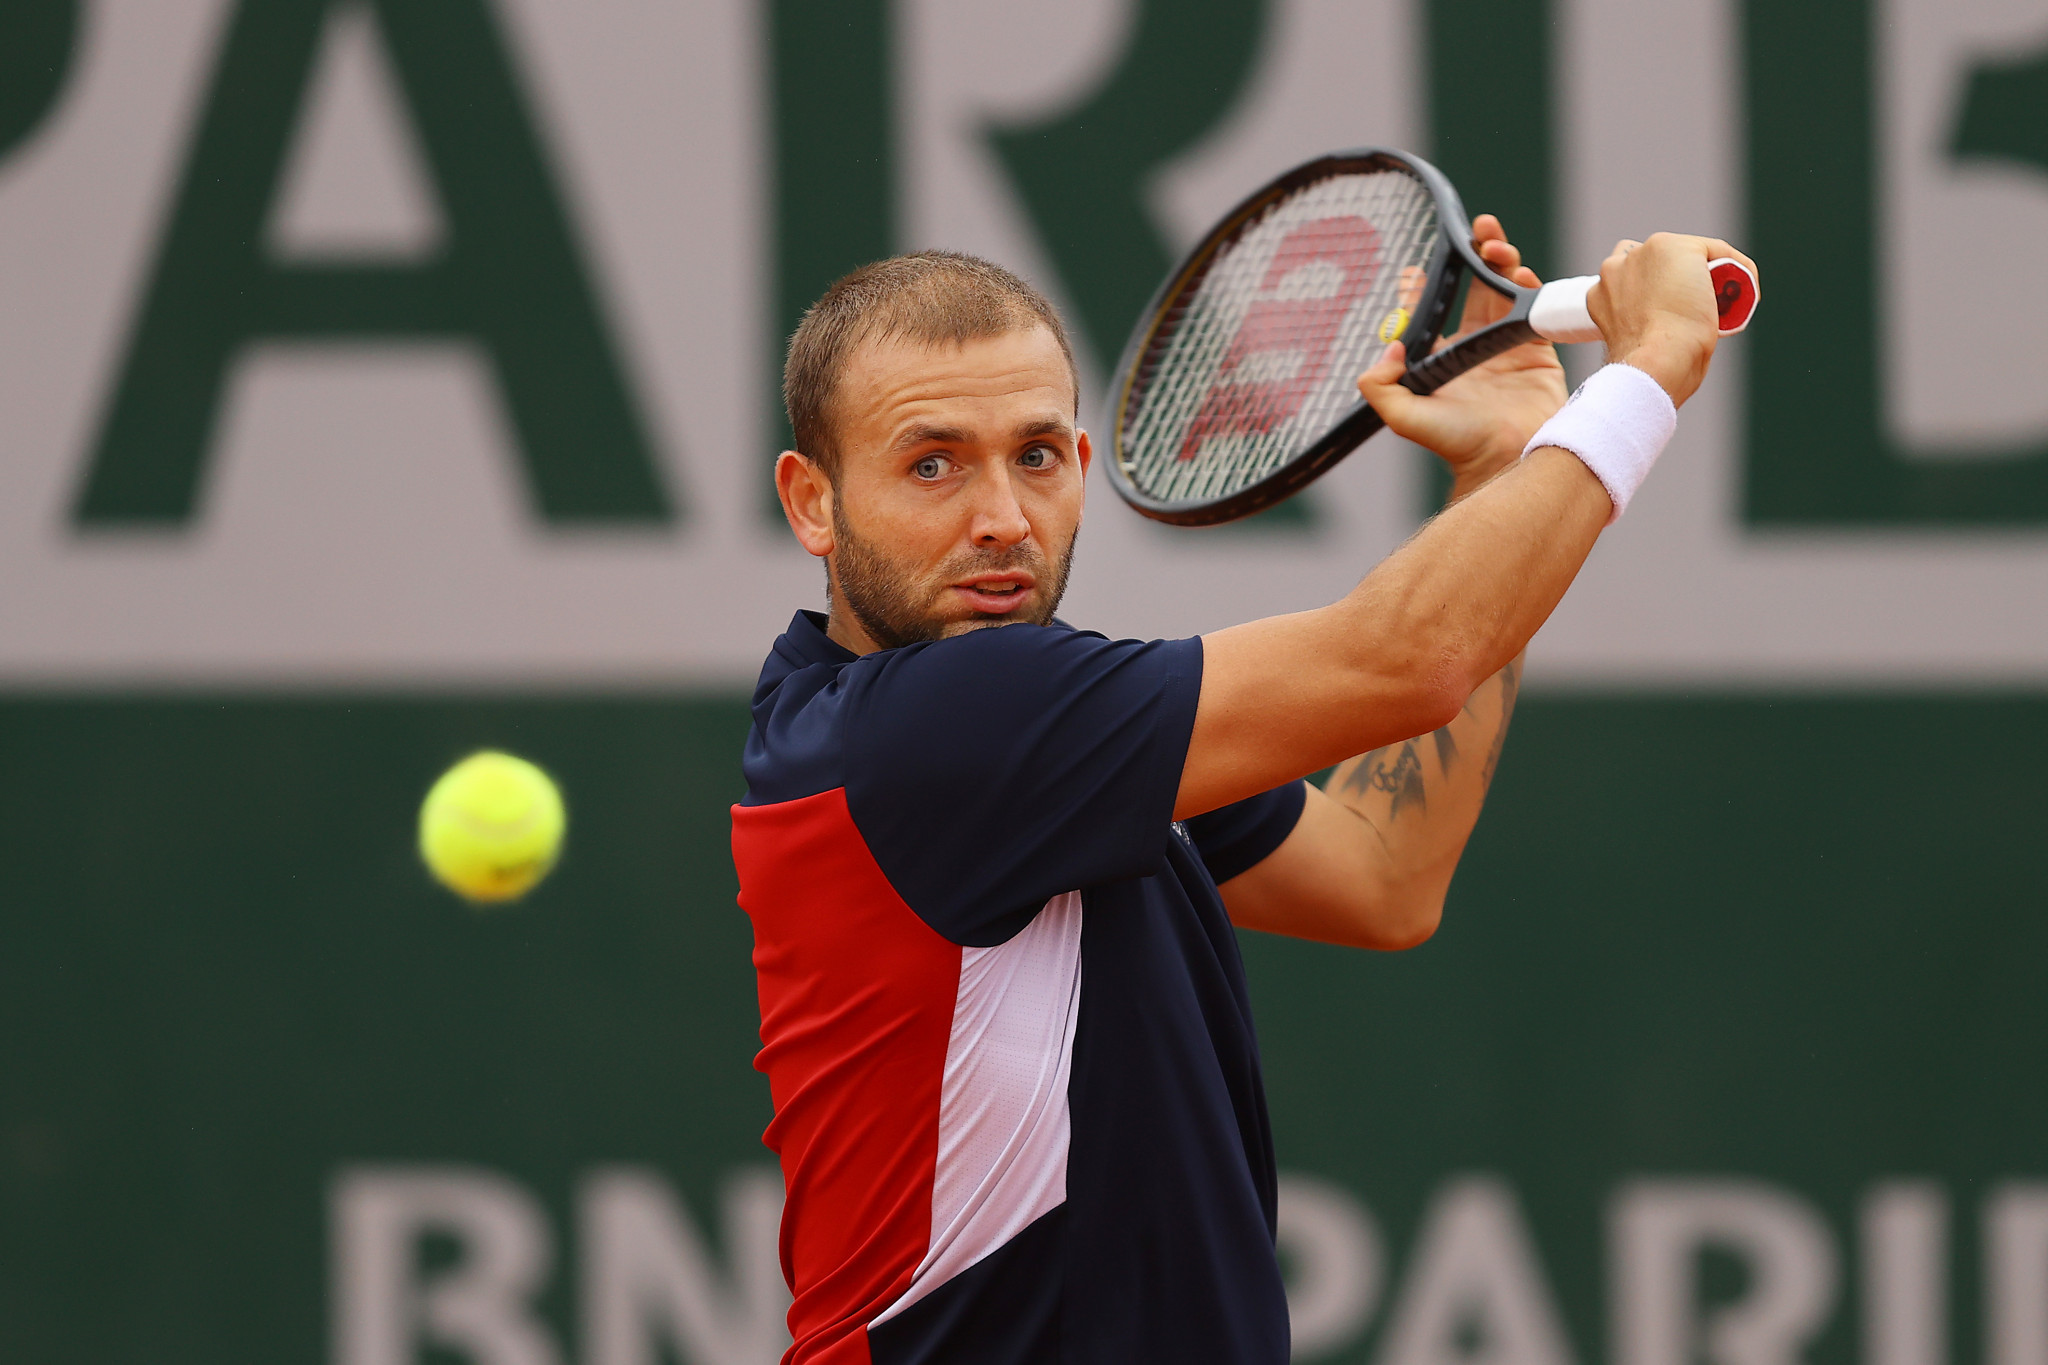 Evans criticises conduct of opponents after men's doubles row at French Open